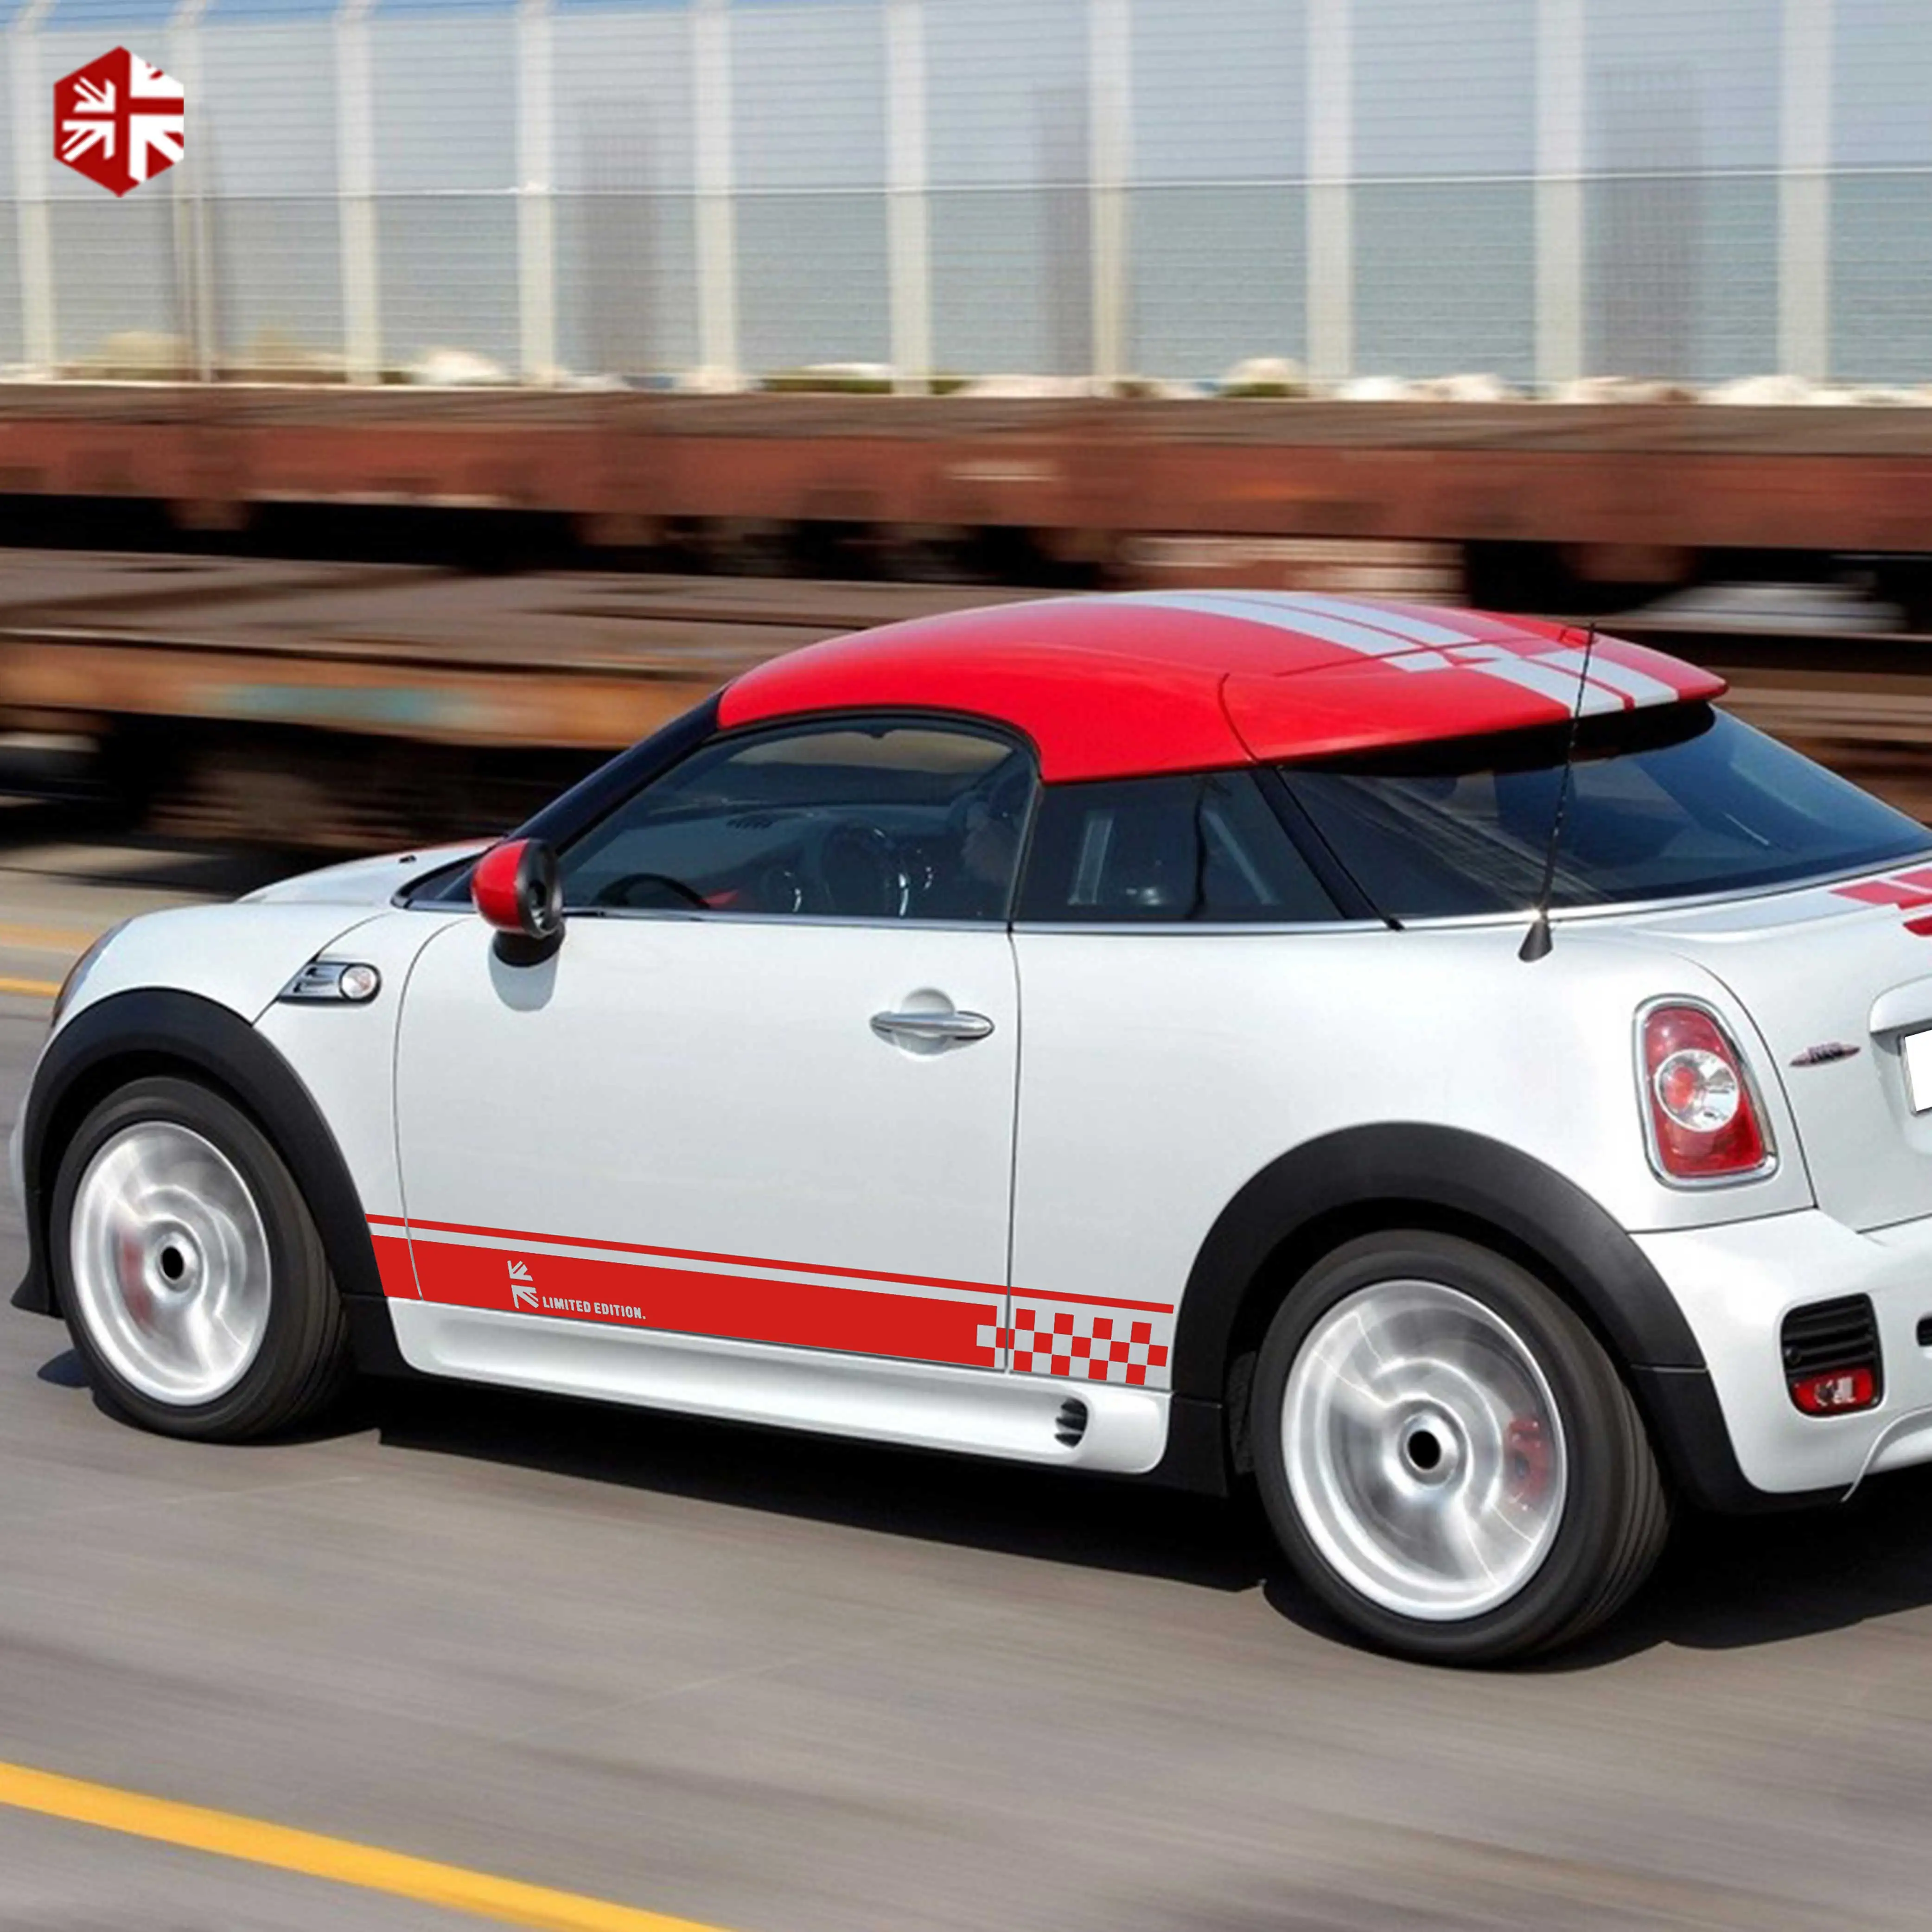 2X Union Jack Styling Car Door Side Stripes Skirt Sticker Limited Edition Body Decal For MINI Cooper R57 R58 R59 JCW Accessories